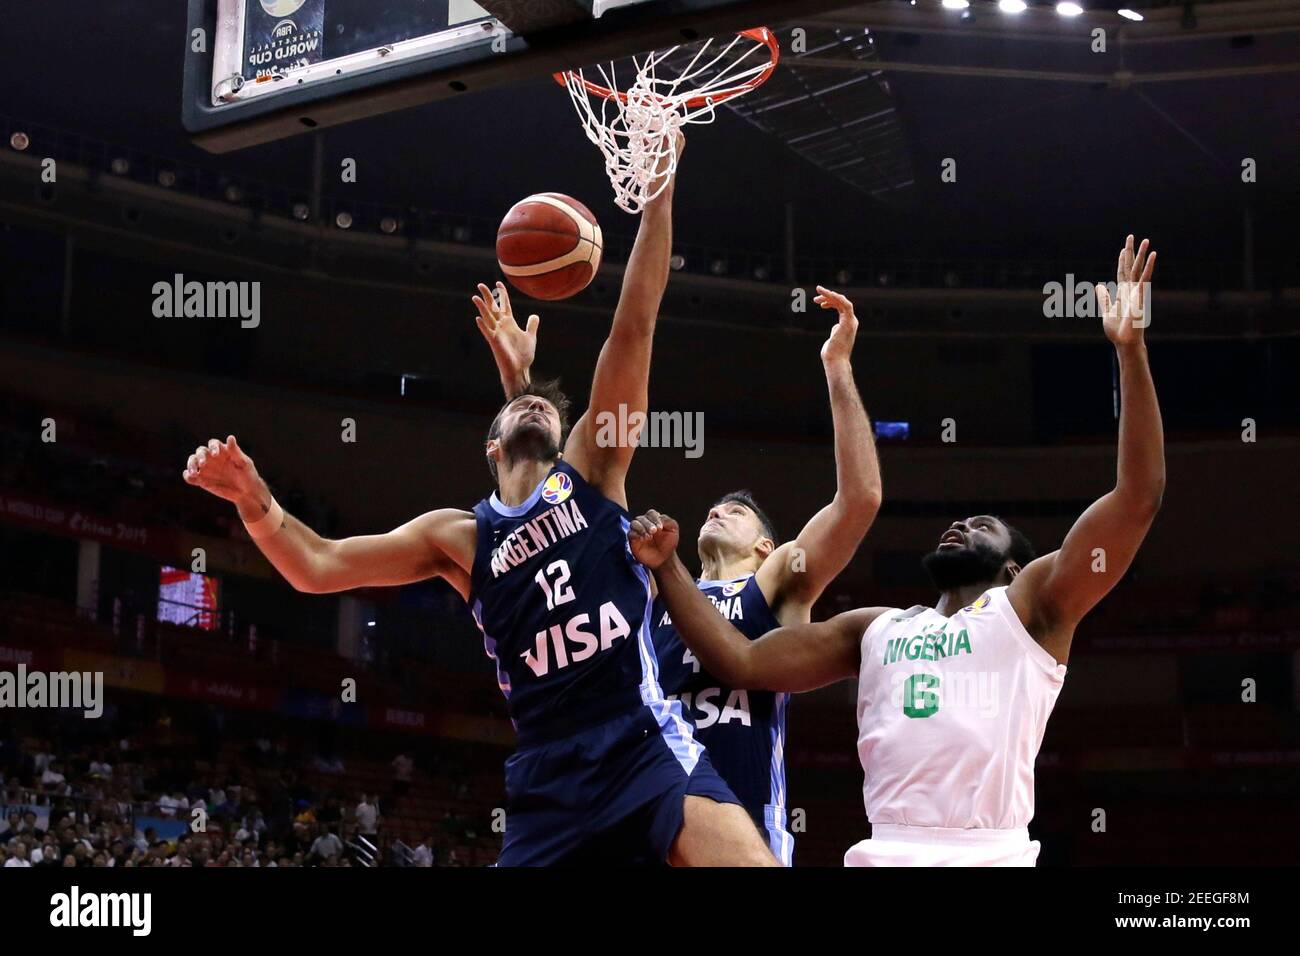 Basketball - FIBA World Cup - First Round - Group B - Nigeria v Argentina - Wuhan Sports Center, Wuhan, China - September 2, 2019 Argentina's Marcos Delia and Luis Scola in action with Nigeria's Ike Diogu REUTERS/Jason Lee Stock Photo